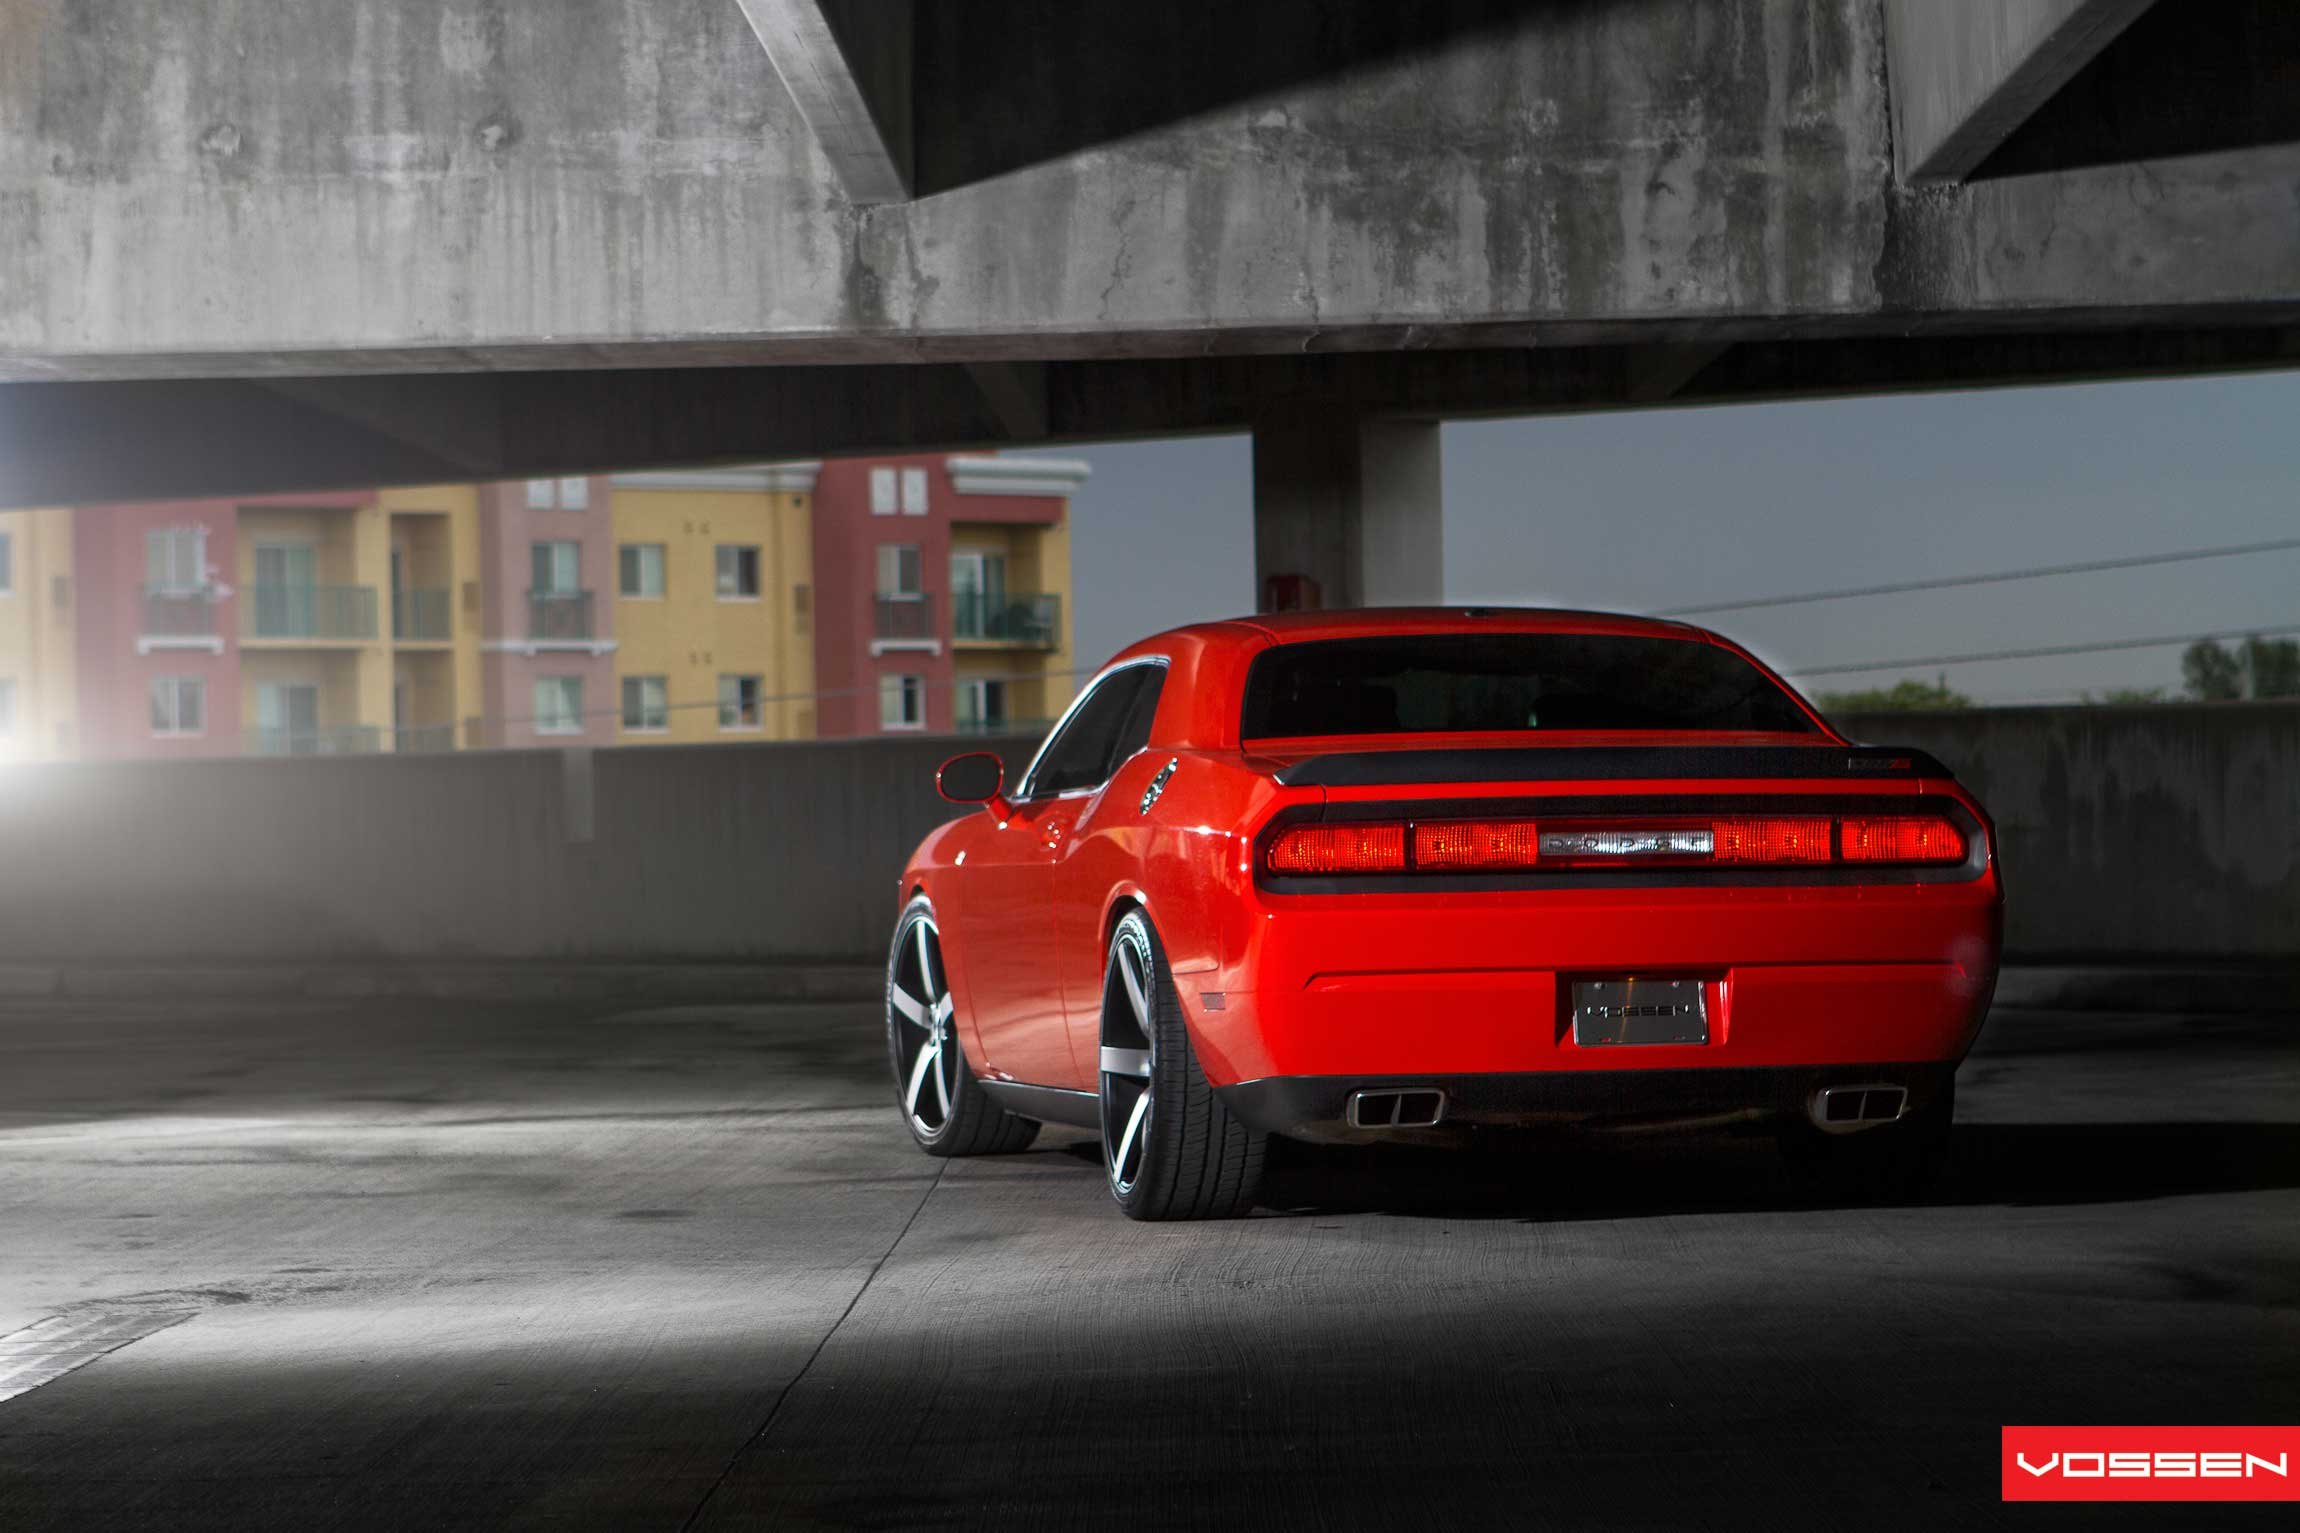 Red Dodge Challenger with Rear Spoiler - Photo by Vossen